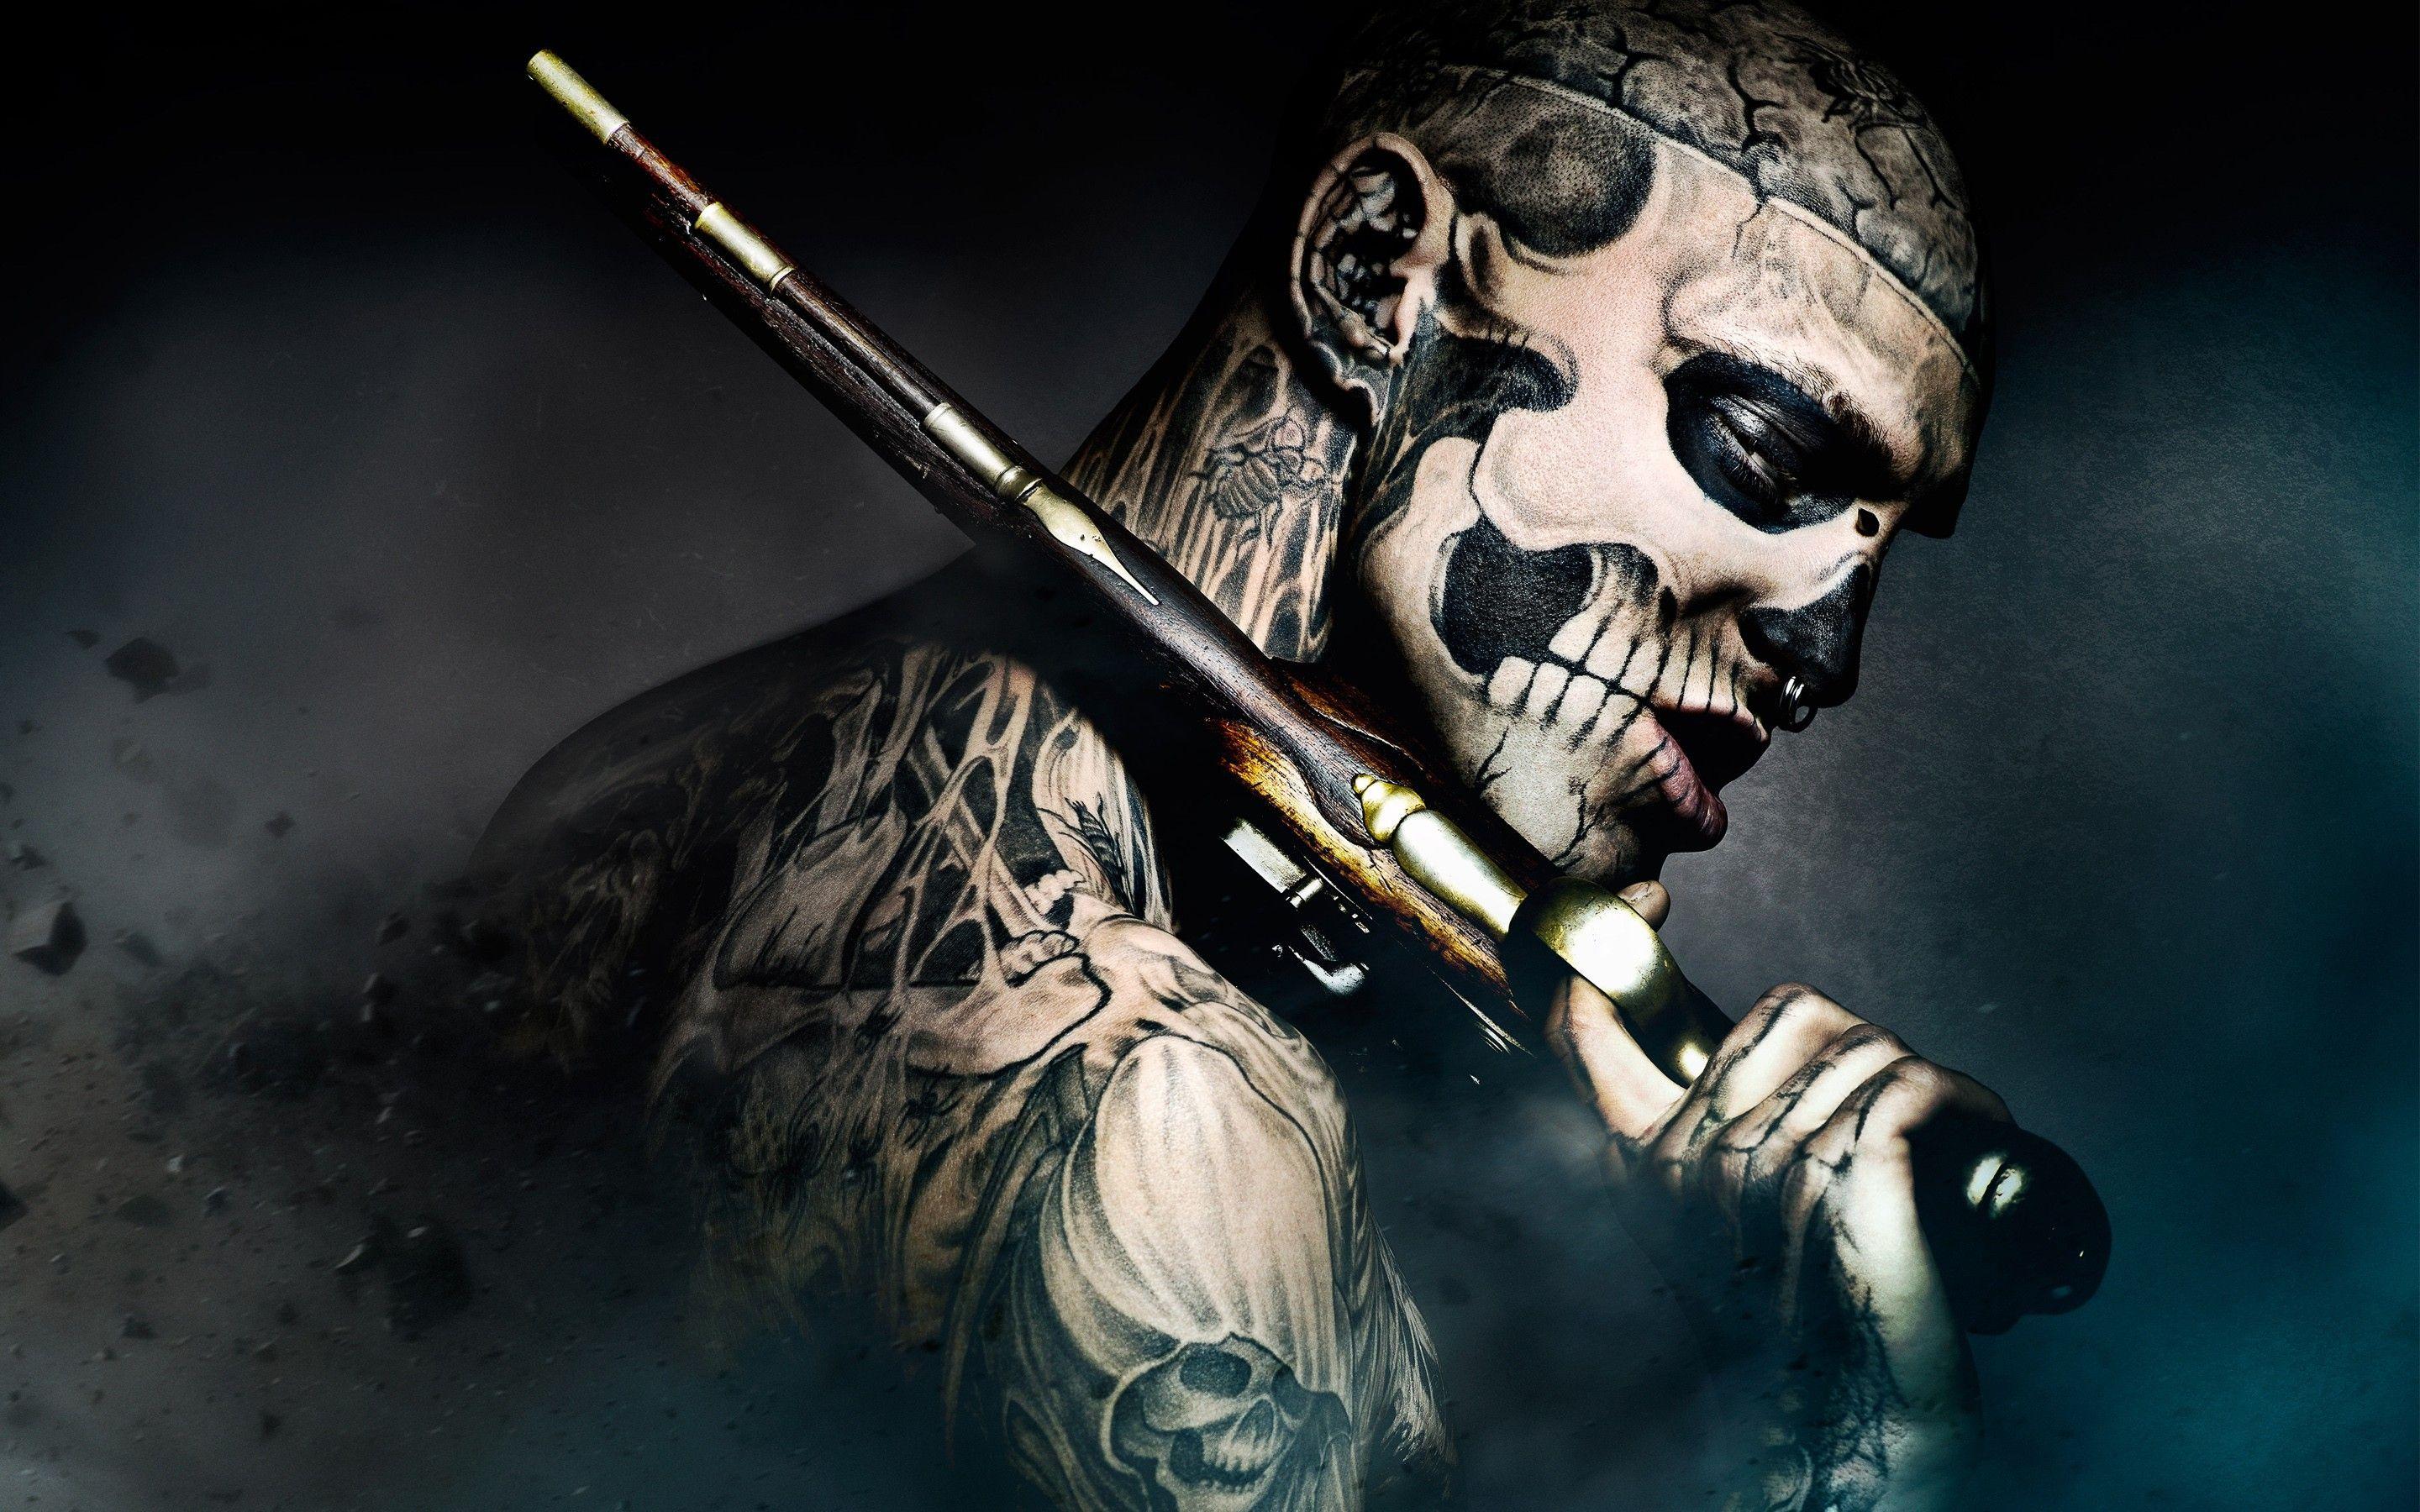 Rico the Zombie wallpaper and image, picture, photo